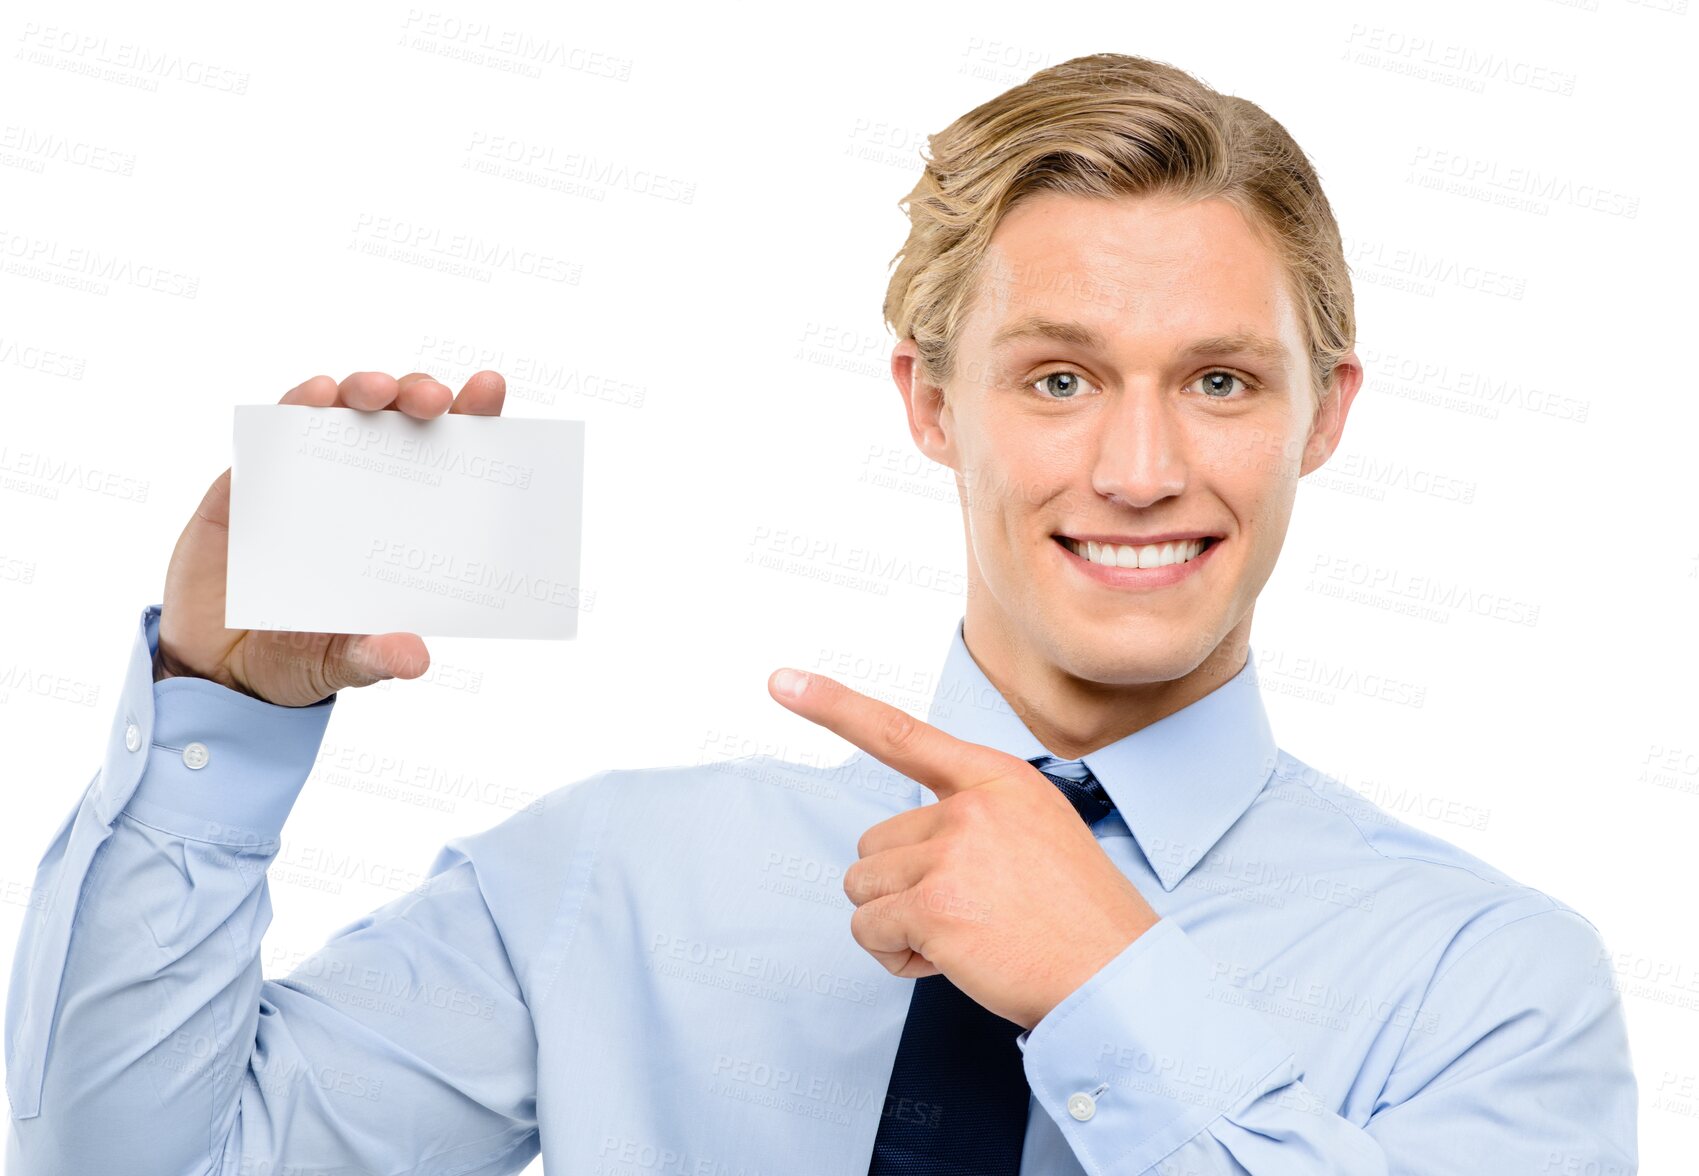 Buy stock photo Portrait, pointing and business man with card isolated on a transparent png background. Face, cardboard and happy professional with hand gesture for marketing, advertising or branding for promotion.